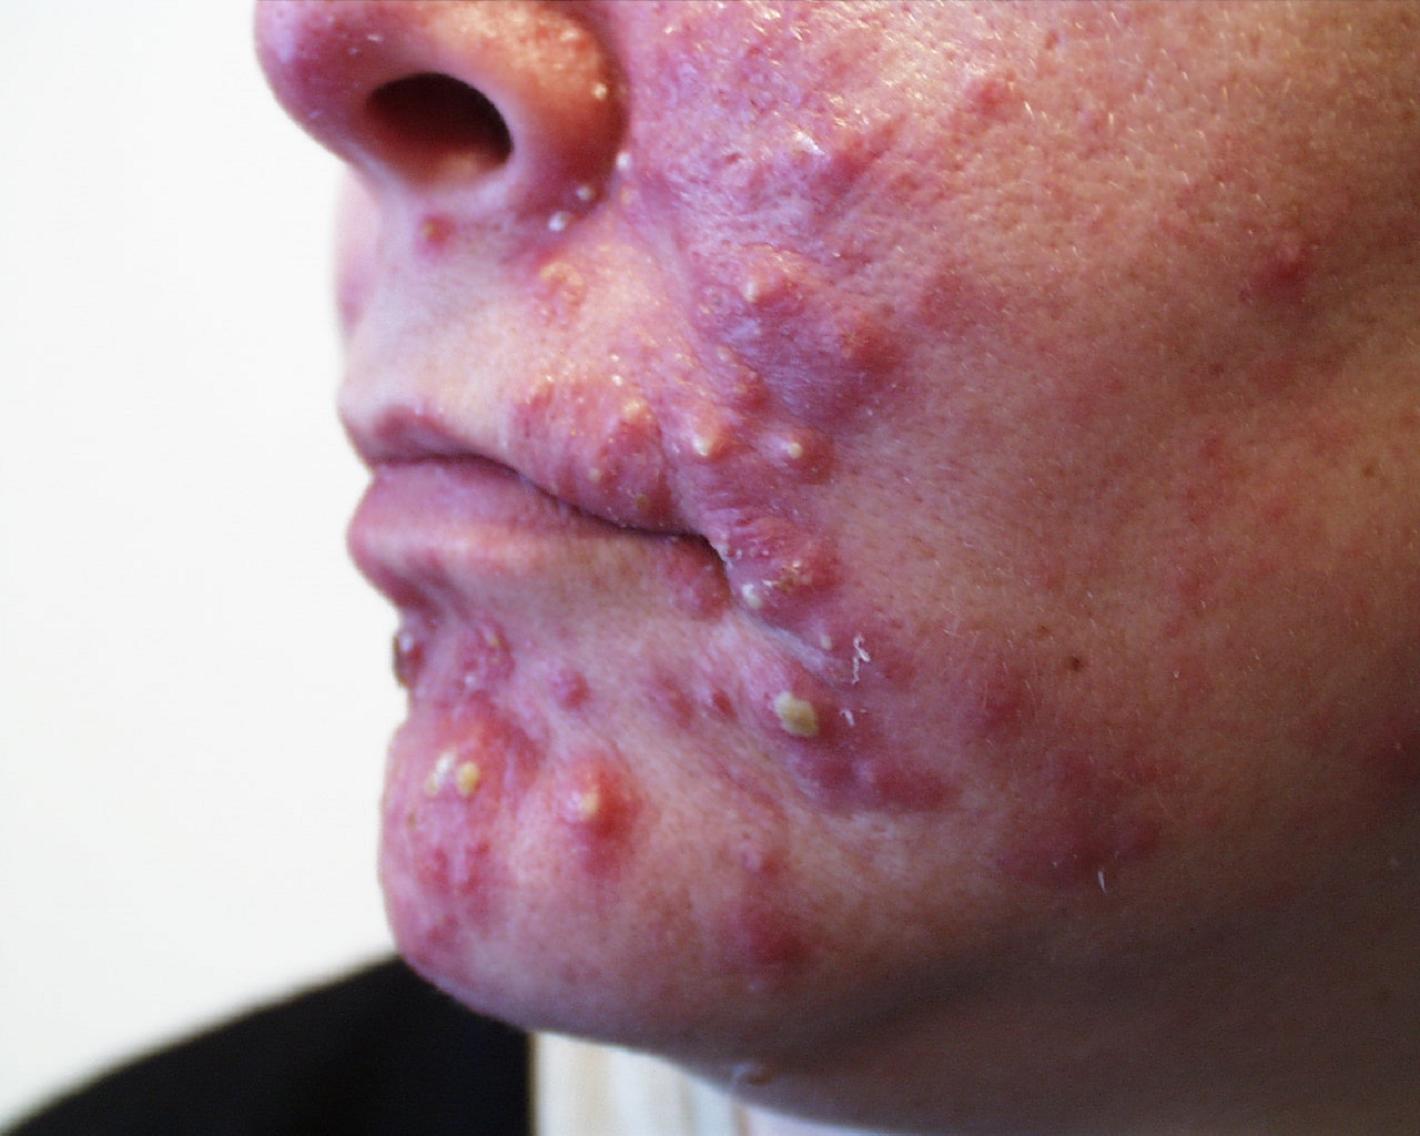 Severe acne popping